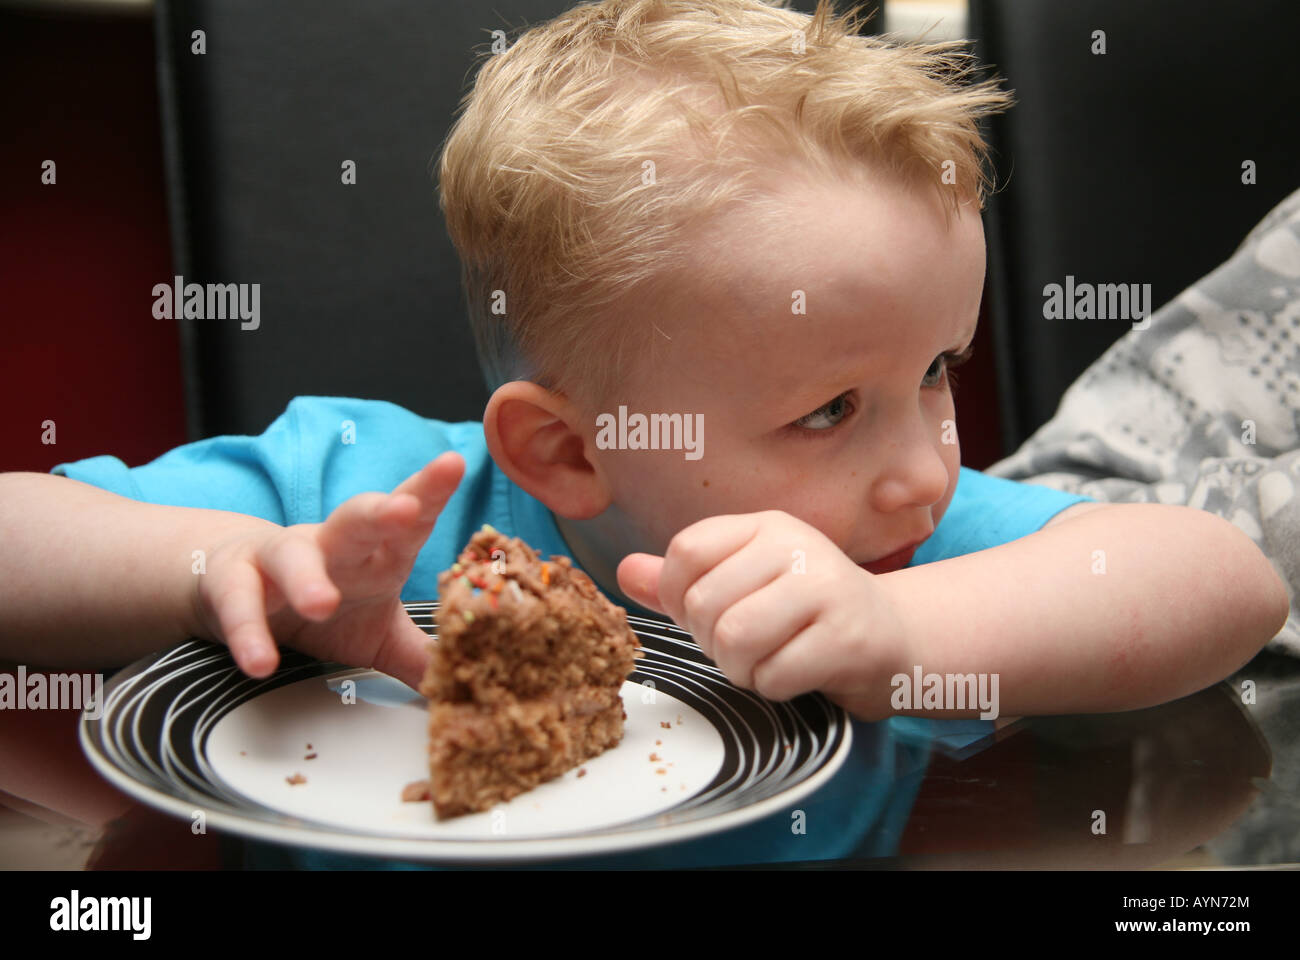 Toddler playing with food Stock Photo